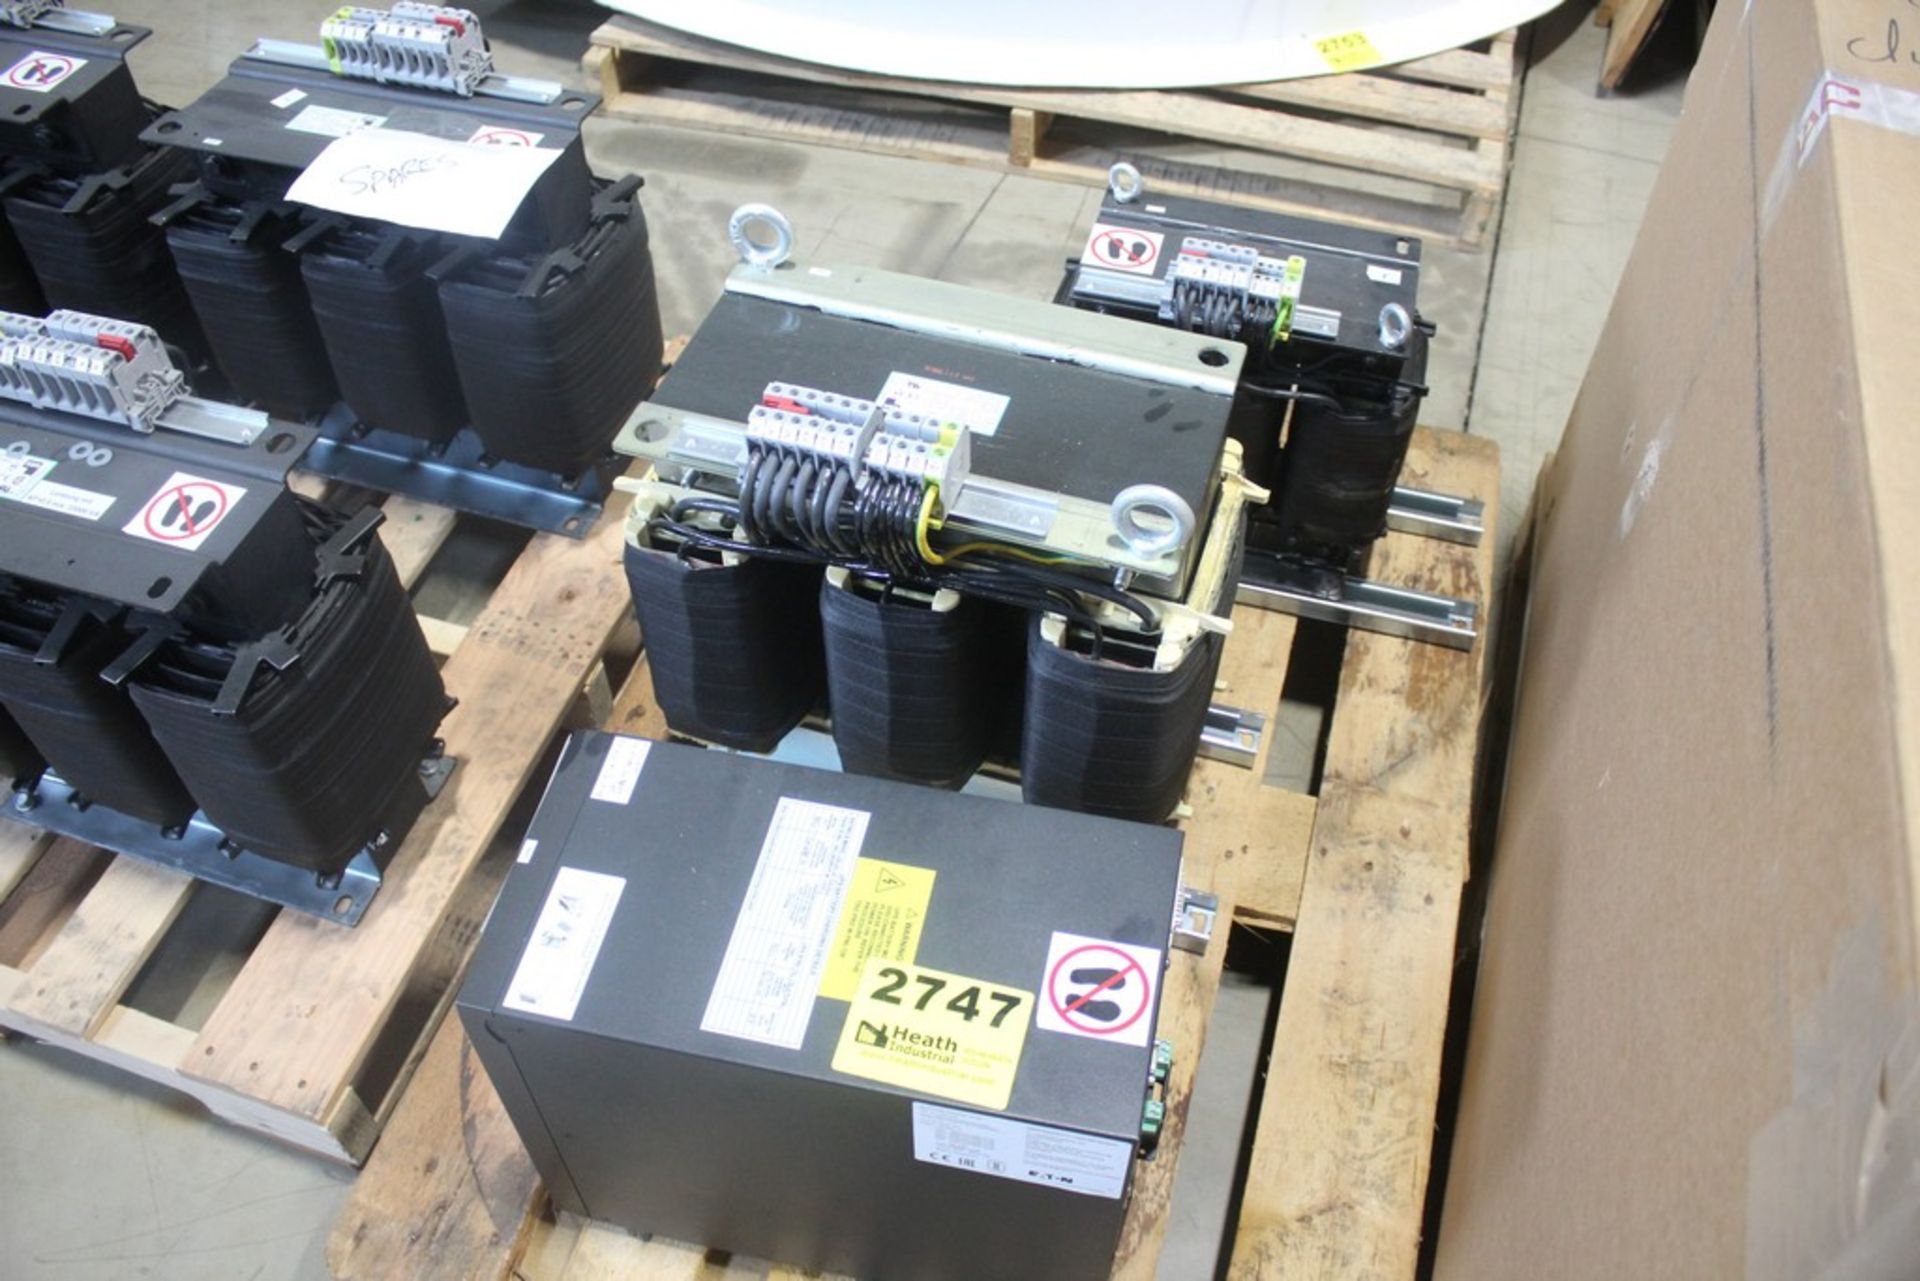 (2) SBA STEP-UP TRANSFORMERS AND EATON UPS ON PALLET